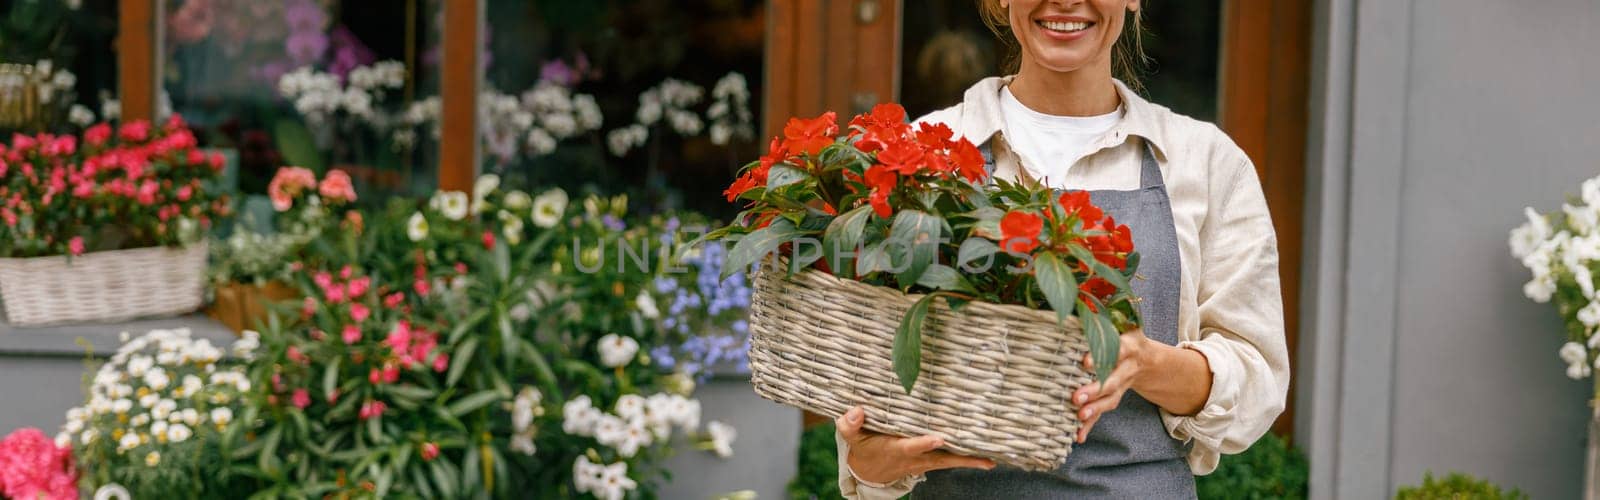 Woman florist small business owner standing in floral store and waiting for client with houseplant